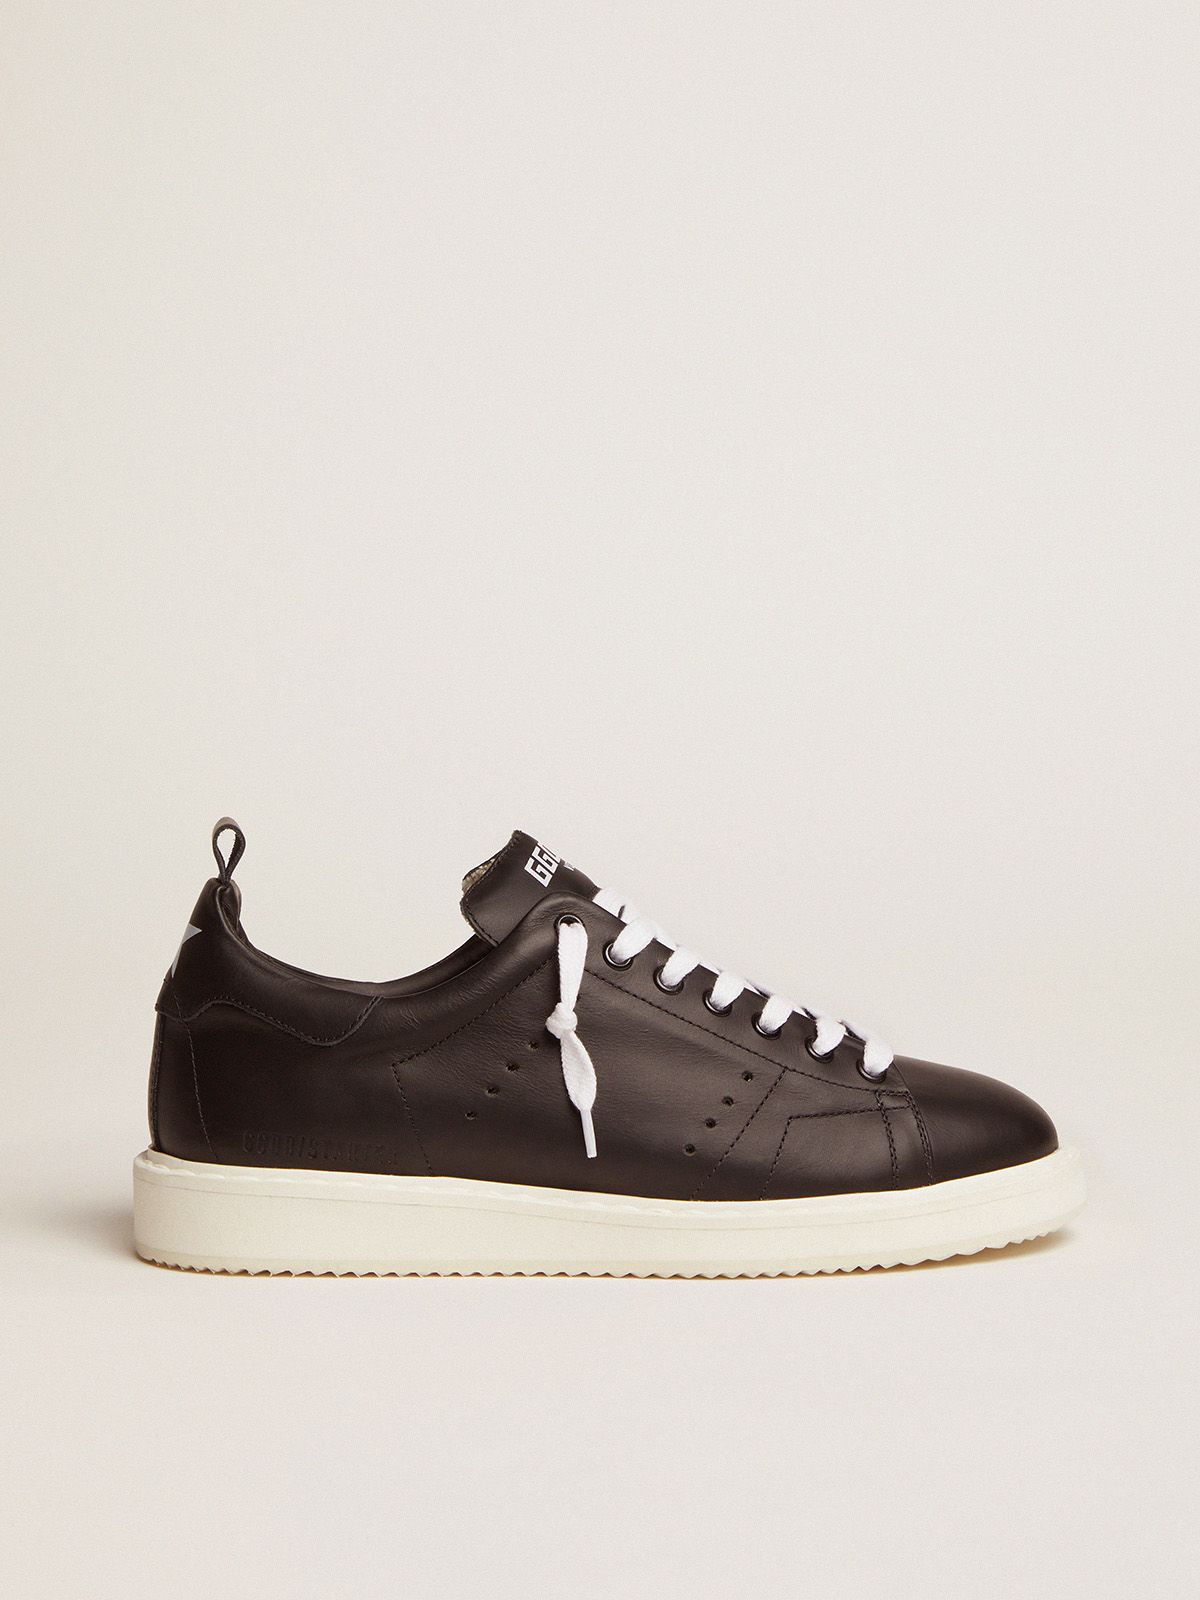 Starter sneakers in total black leather